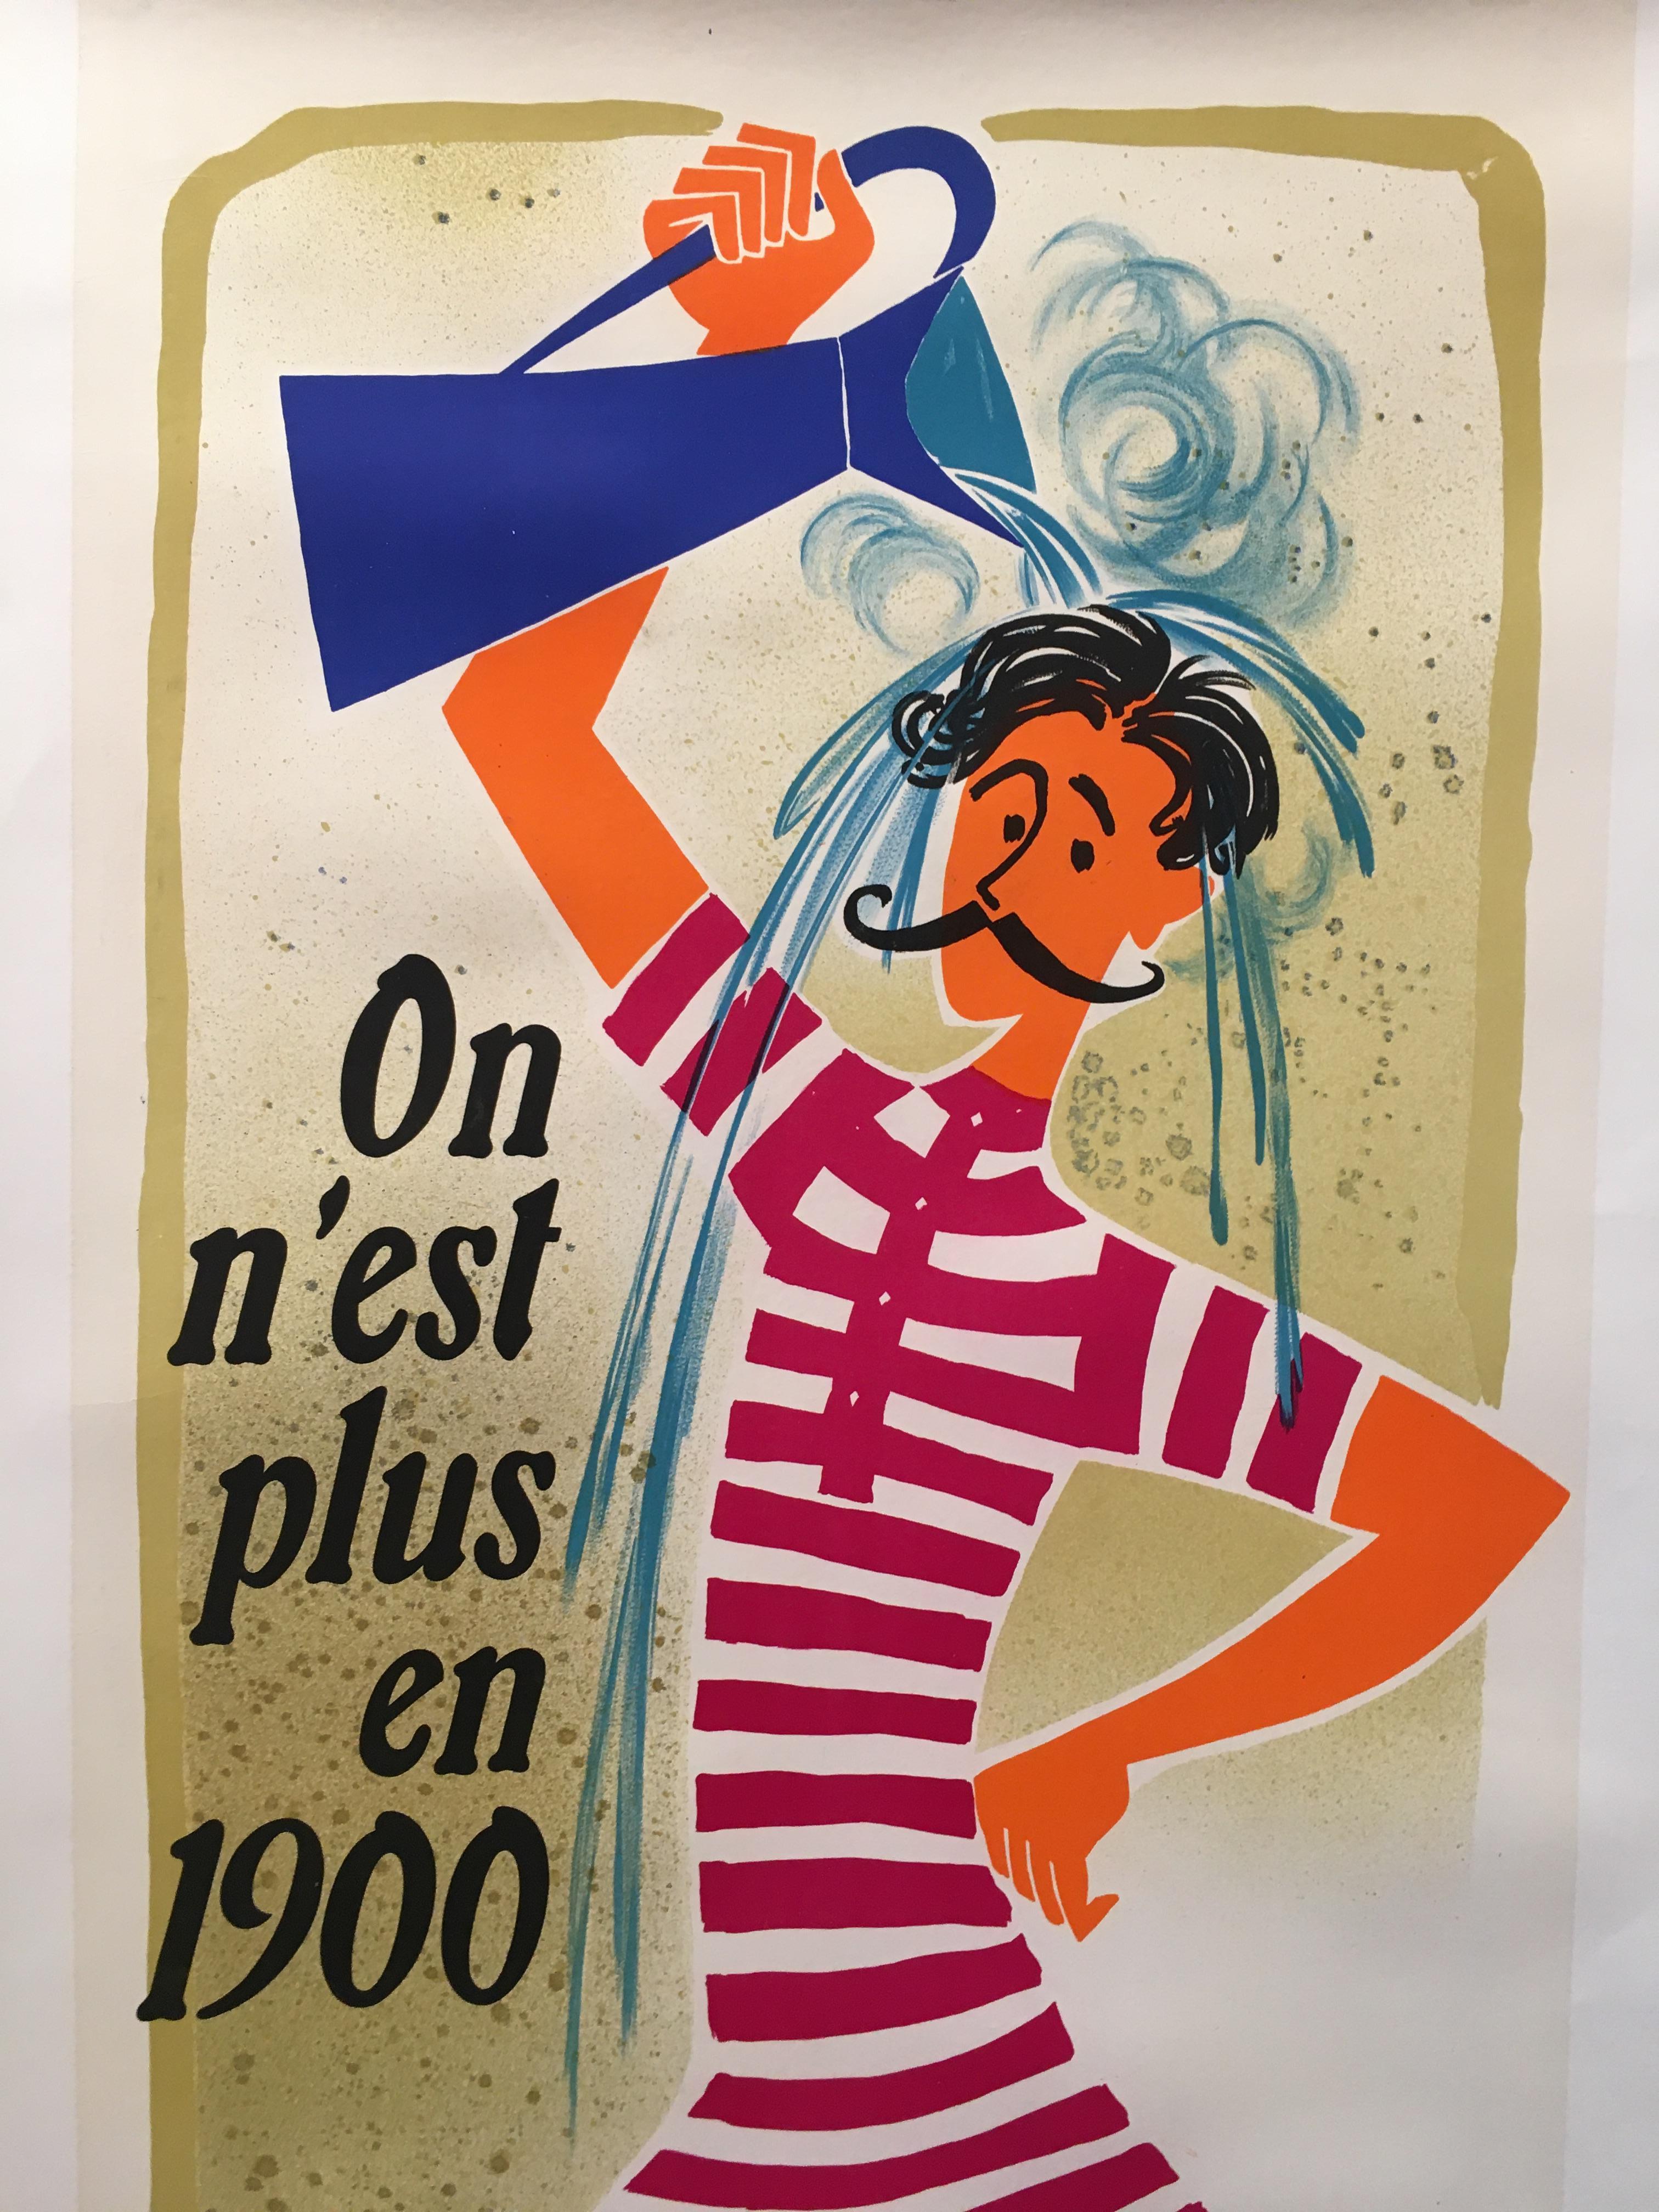 'Chauffe-Eau Électrique' original vintage poster by Jean Colin, Circa 1950

A very cheerful and happy poster advertising a hot water system. This poster has been linen backed for preservation

Year
Circa 1951

Dimensions:
160 x 60